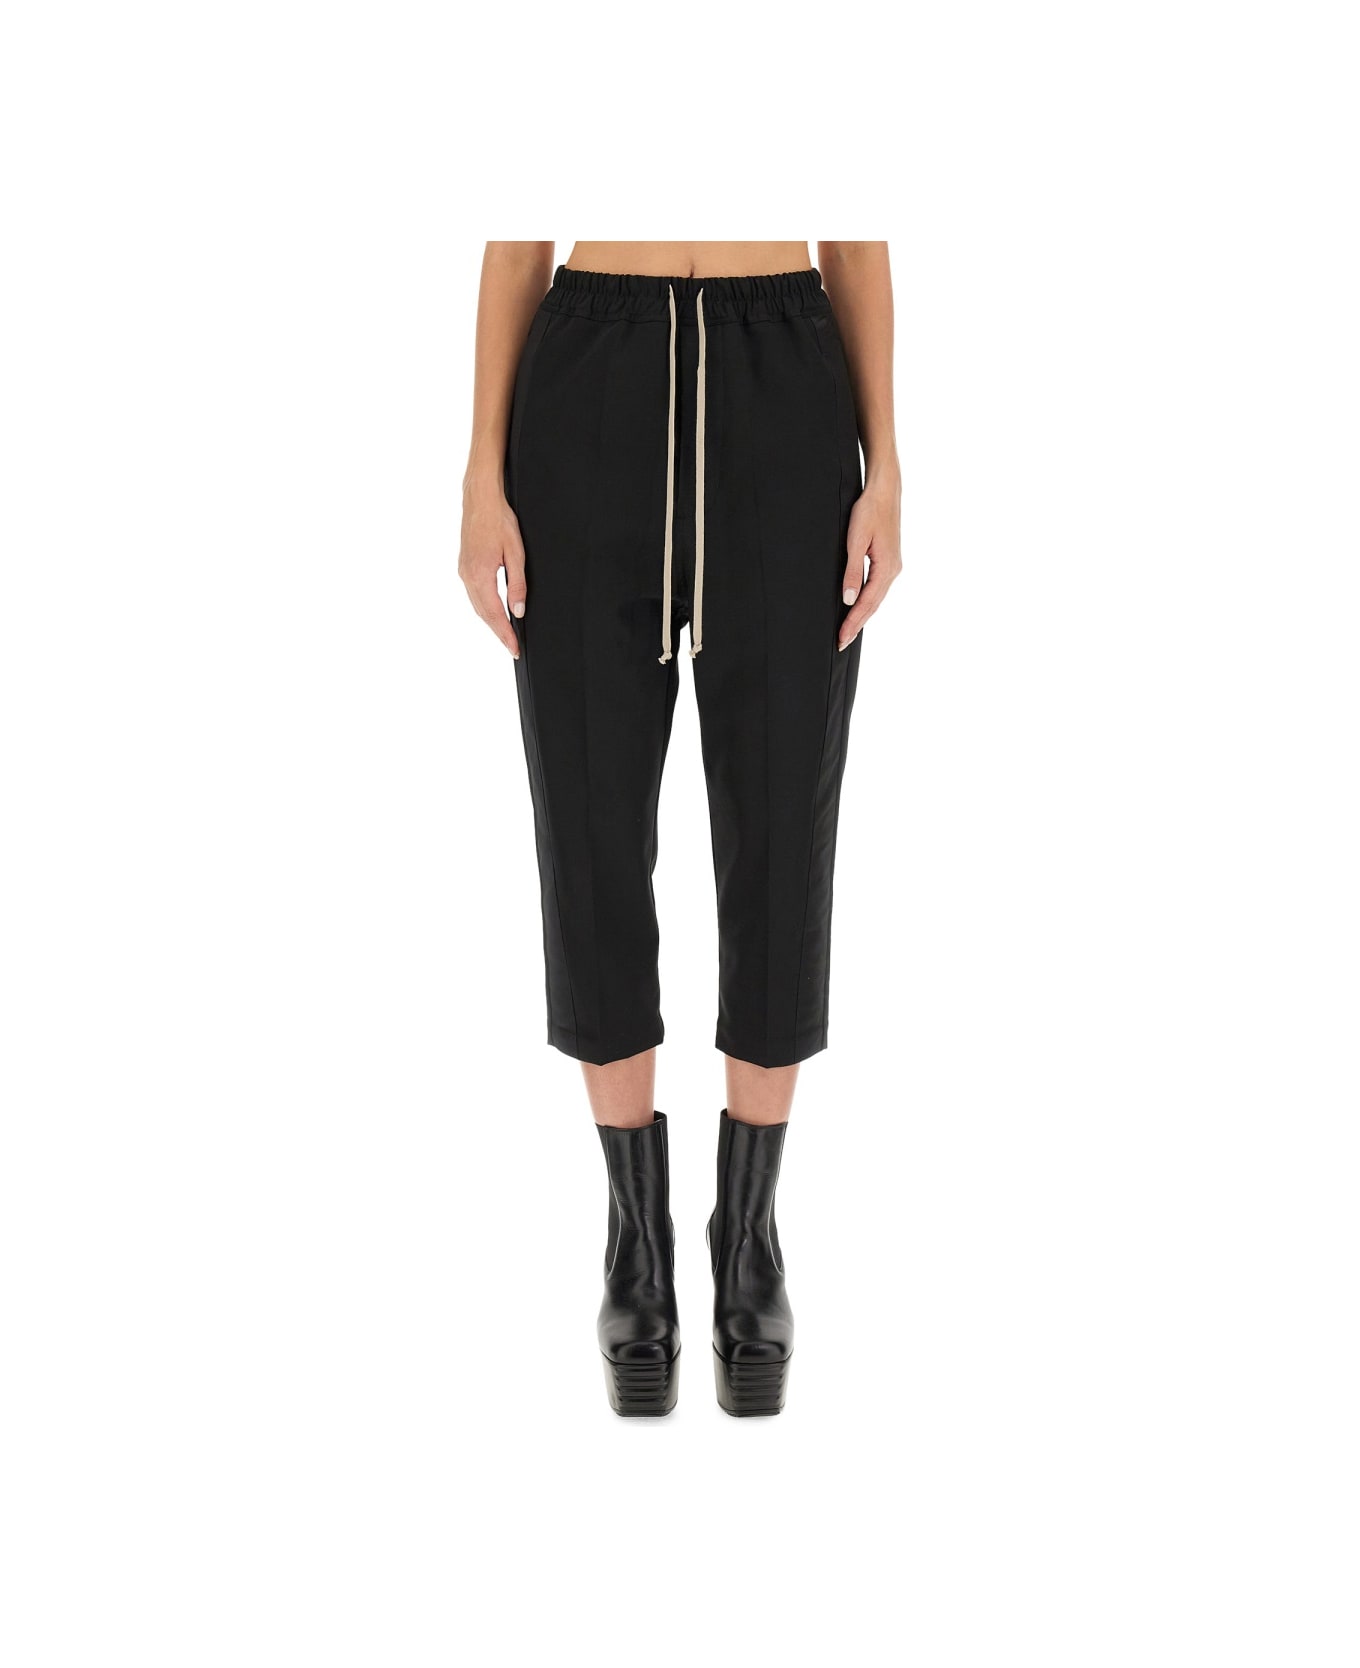 Rick Owens Drawstring Astaires Cropped Pants - BLACK